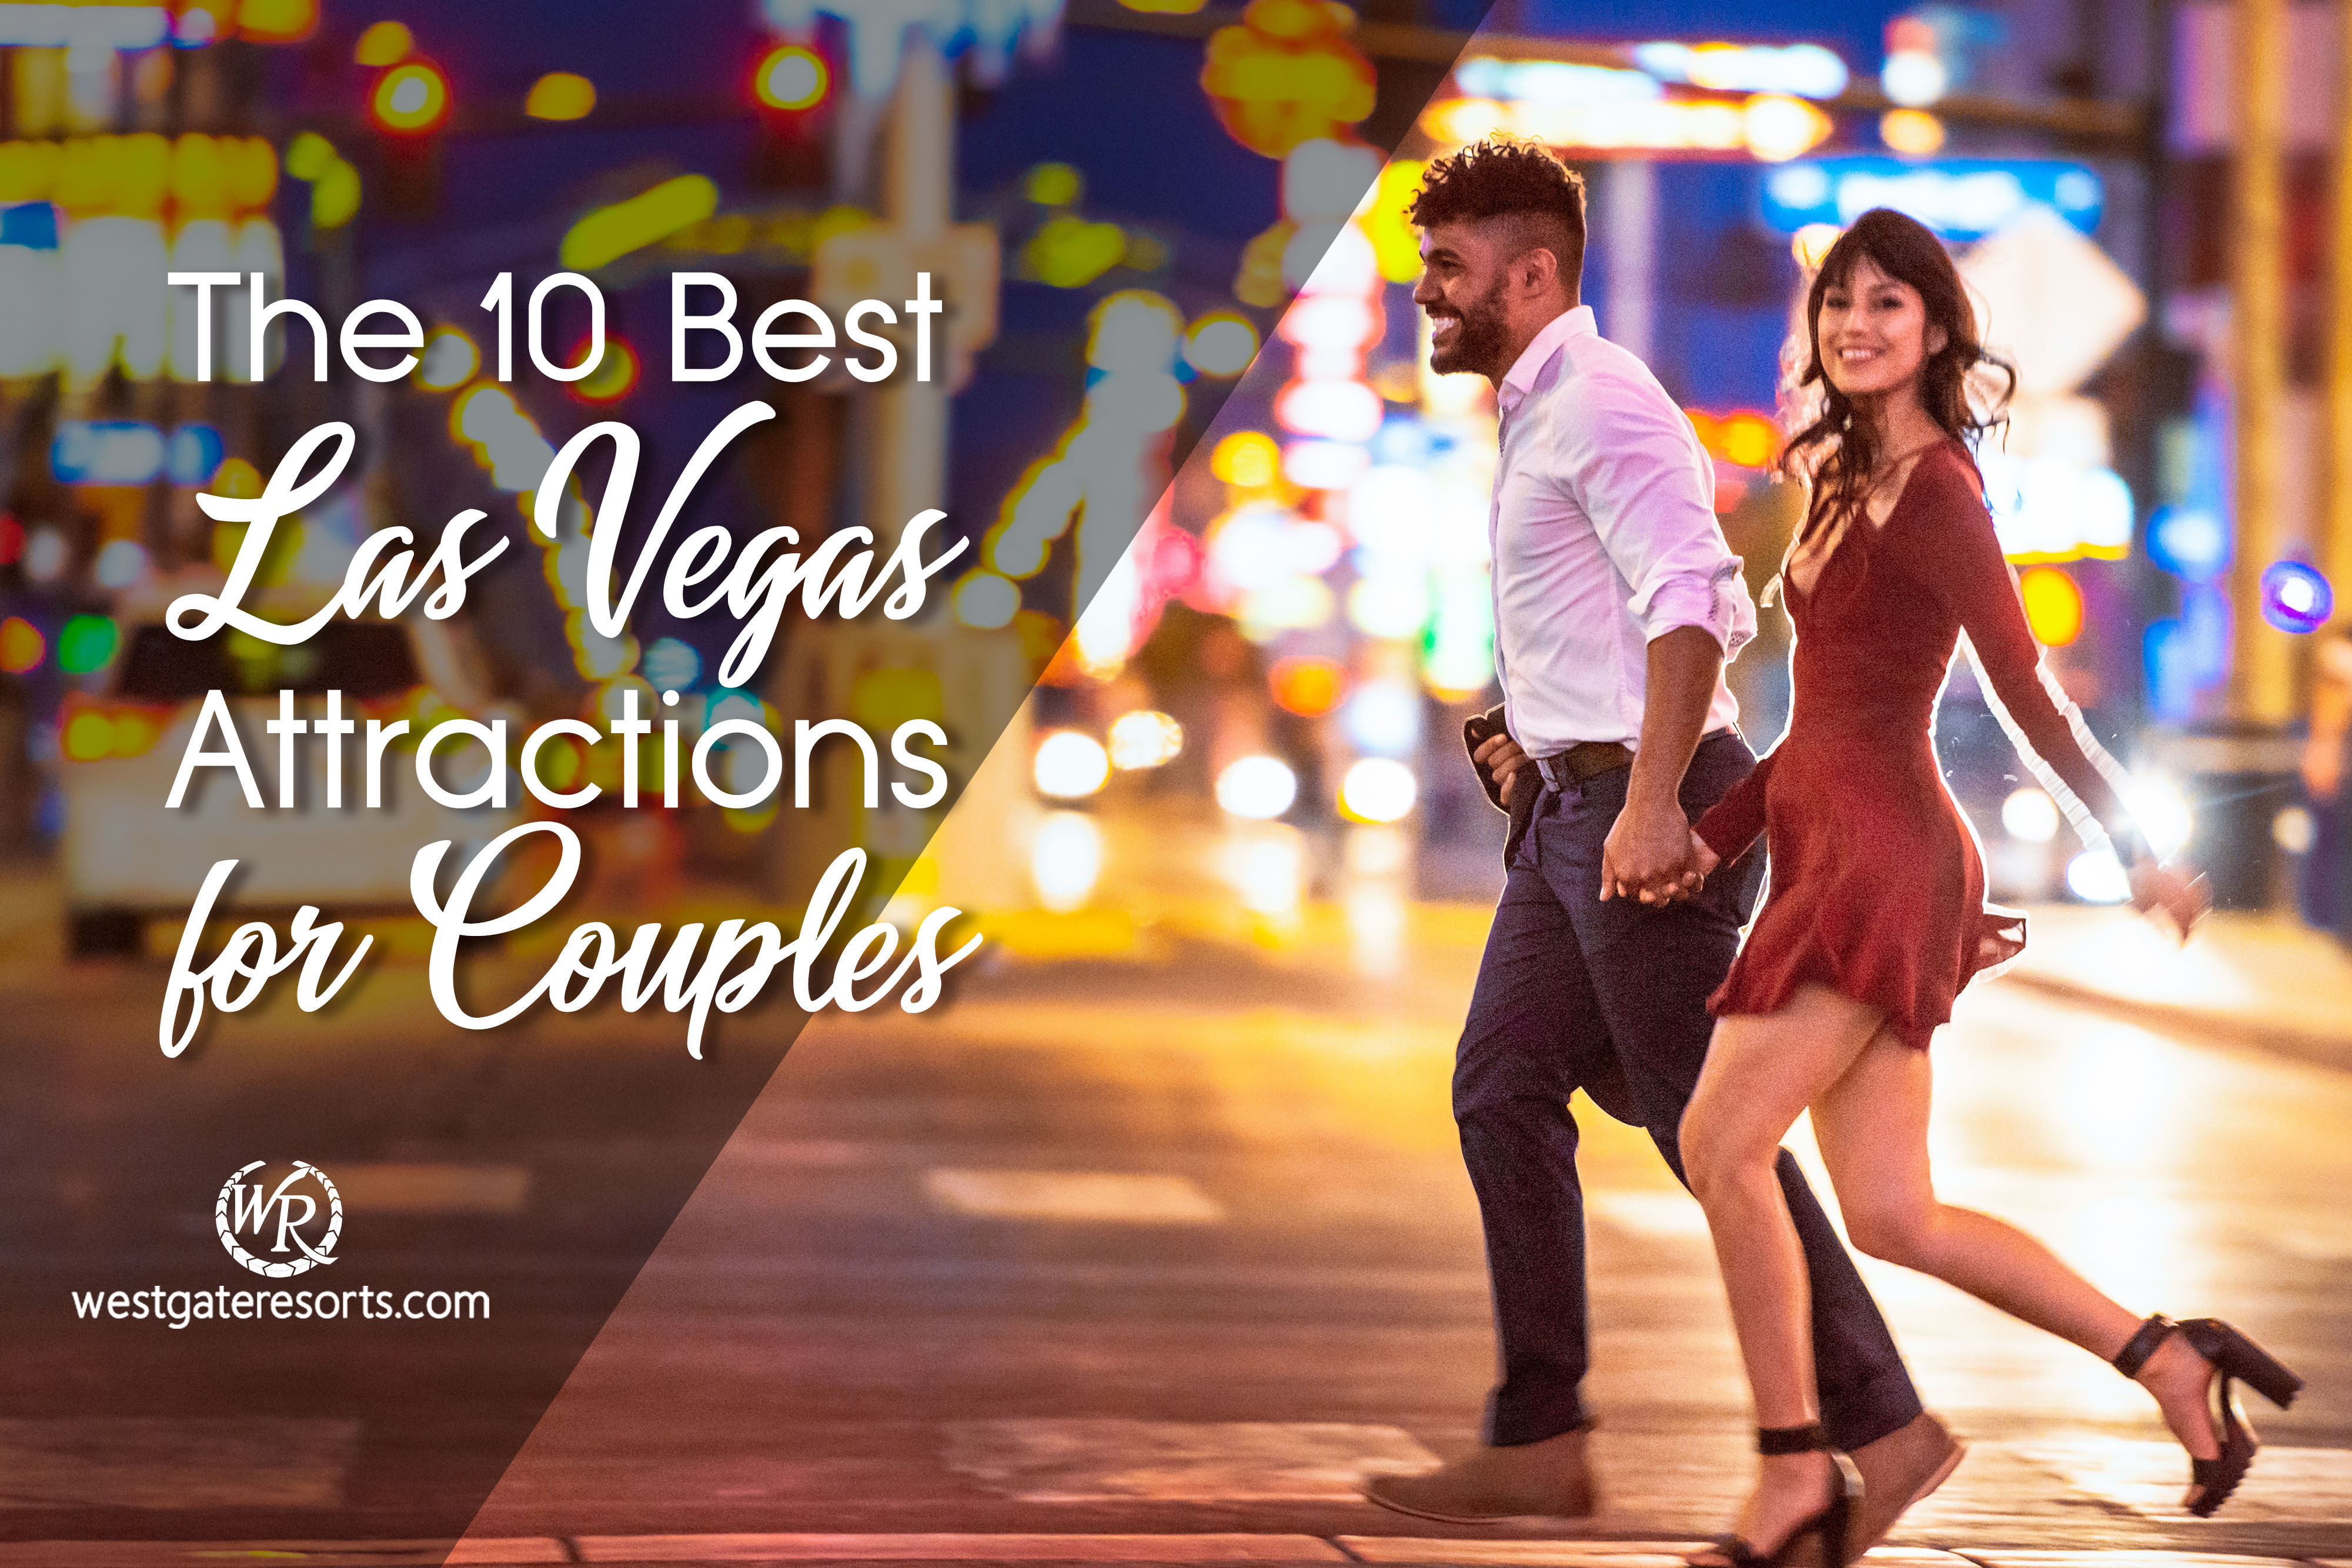 The 10 Best Las Vegas Attractions for Couples | Things to do in Las Vegas for couples